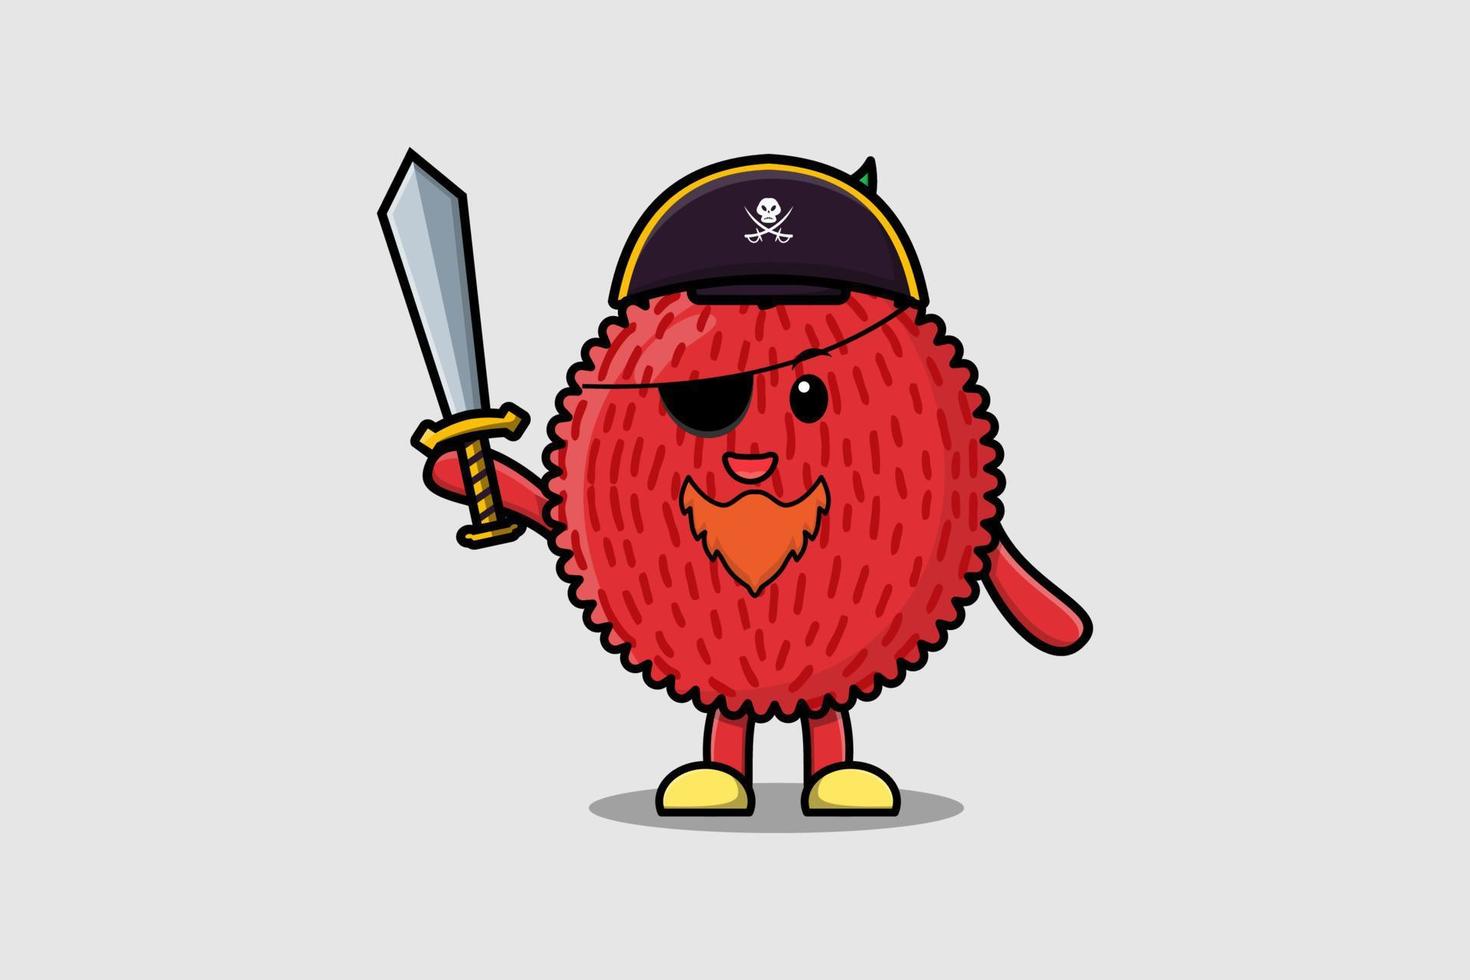 Cute cartoon character Lychee pirate holding sword vector